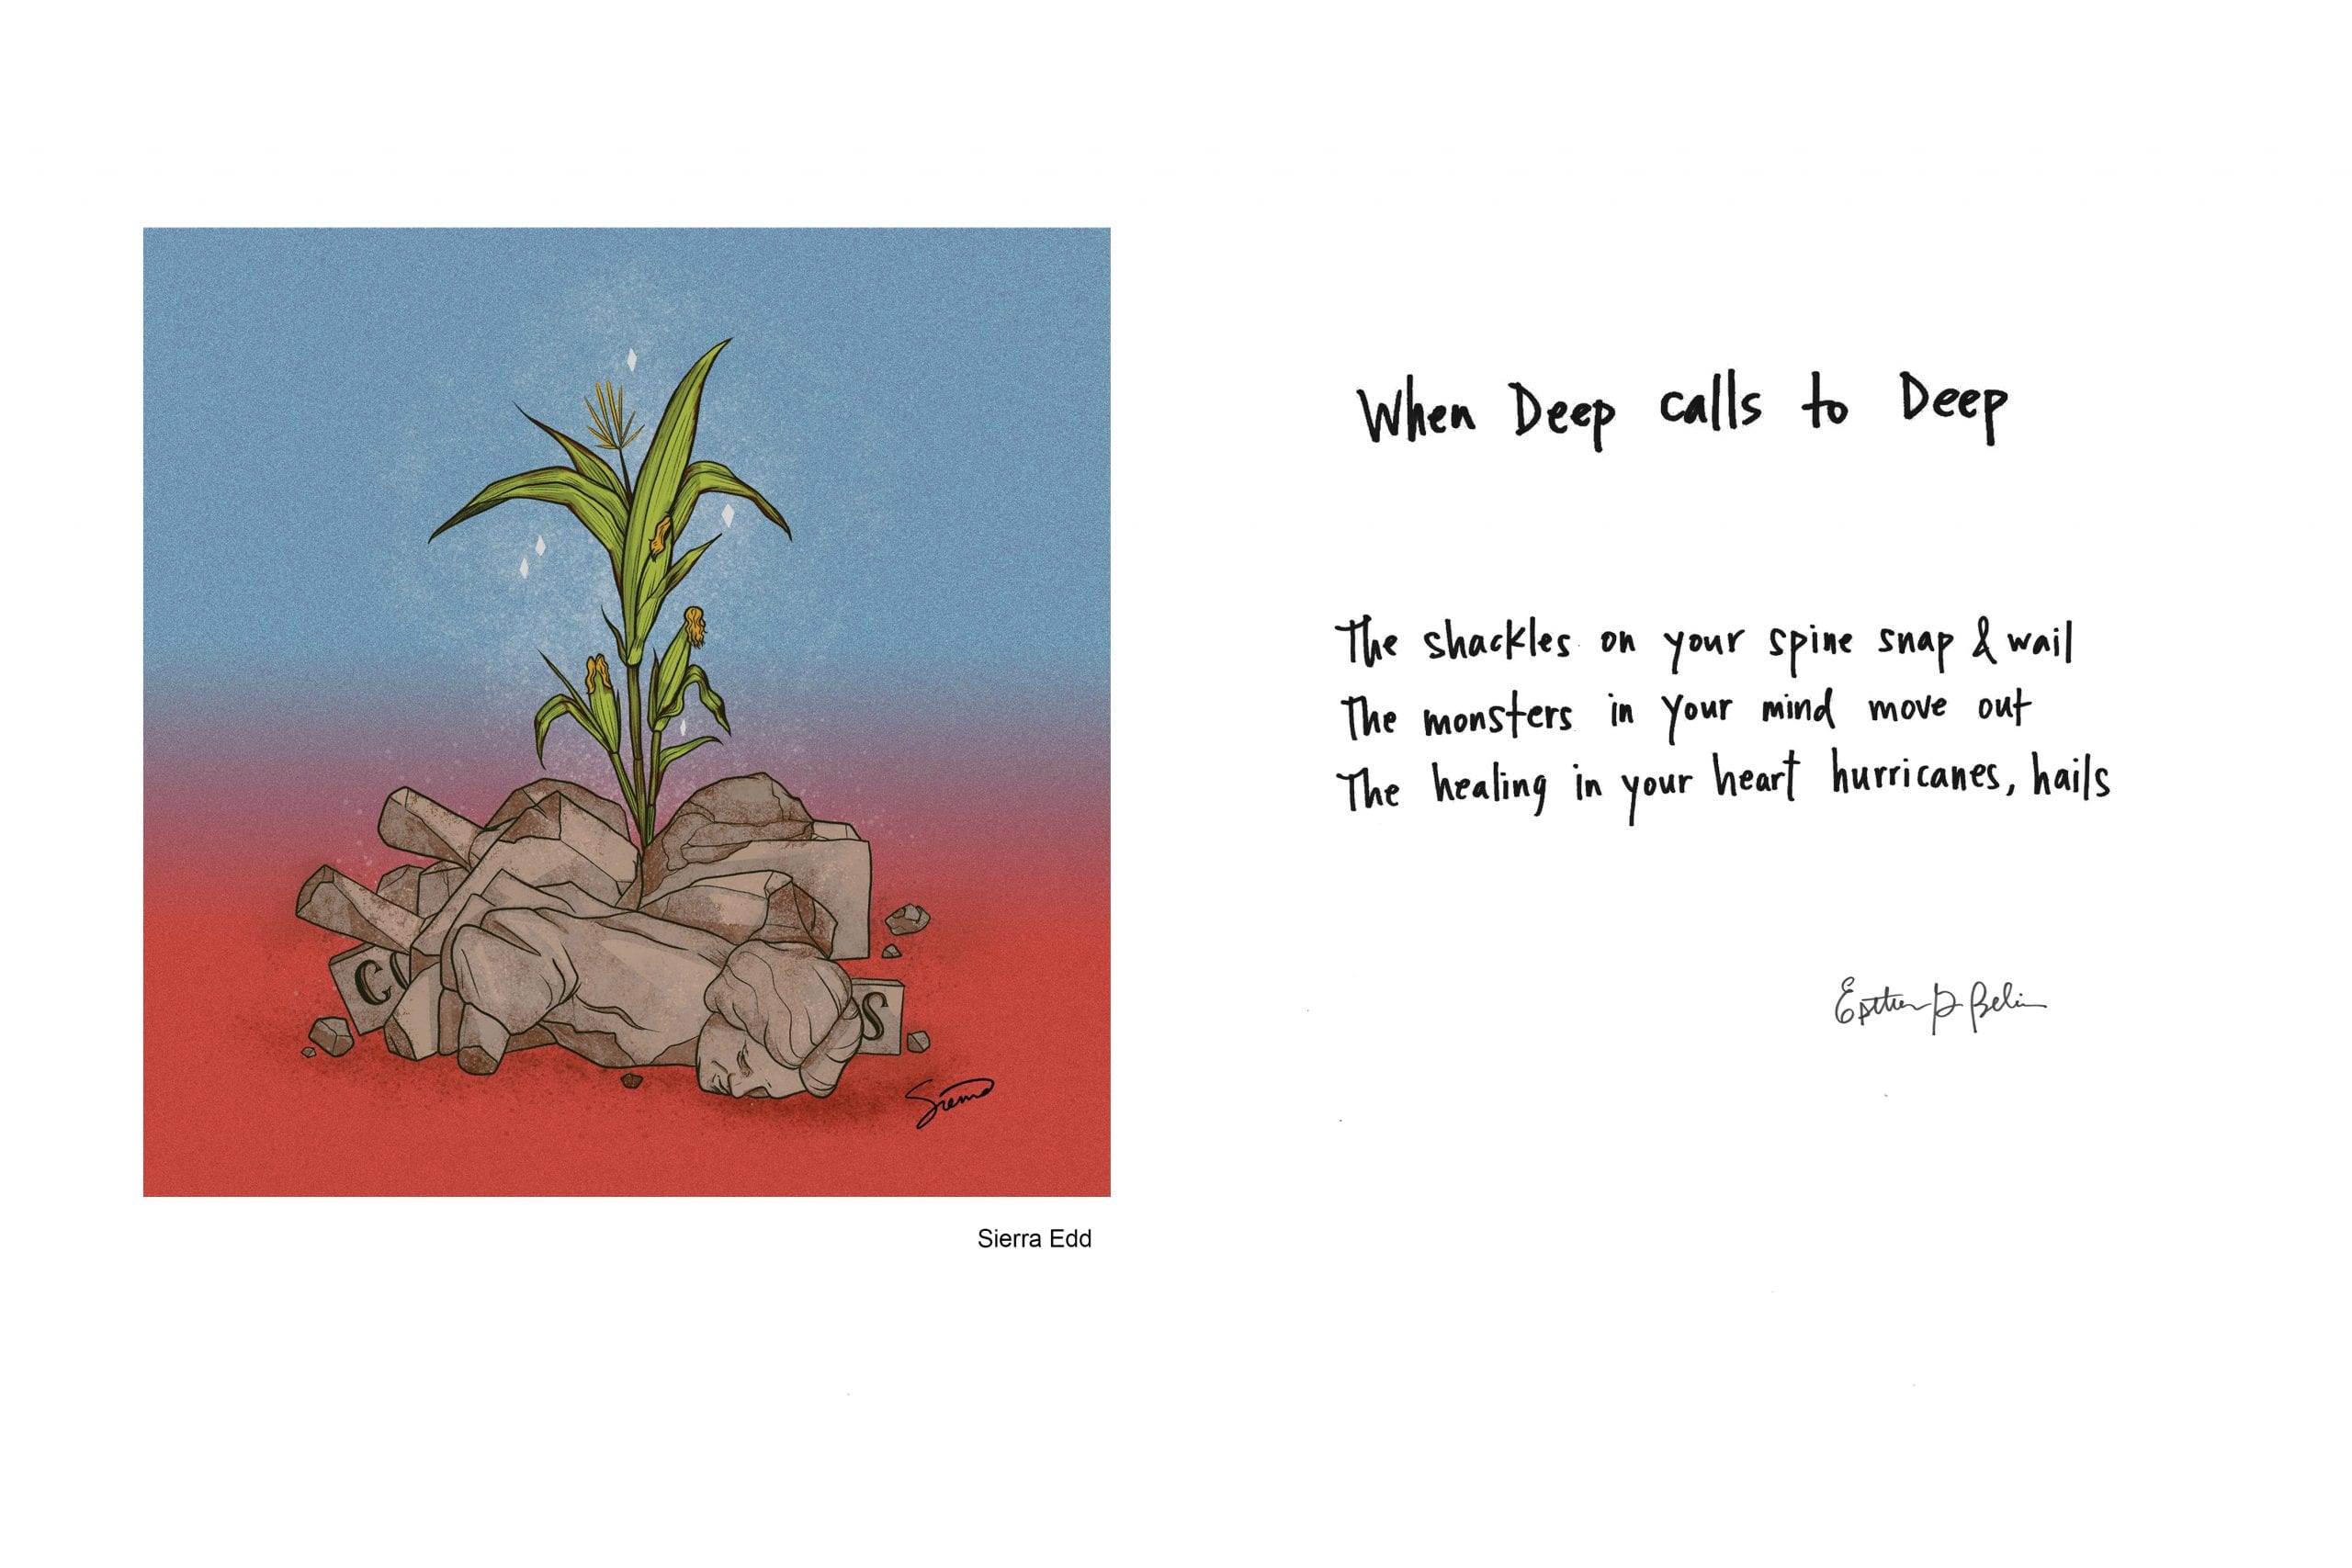 To the left is a color drawing of a stalk of corn growing from a pile of rocks; to the right is a handwritten poem